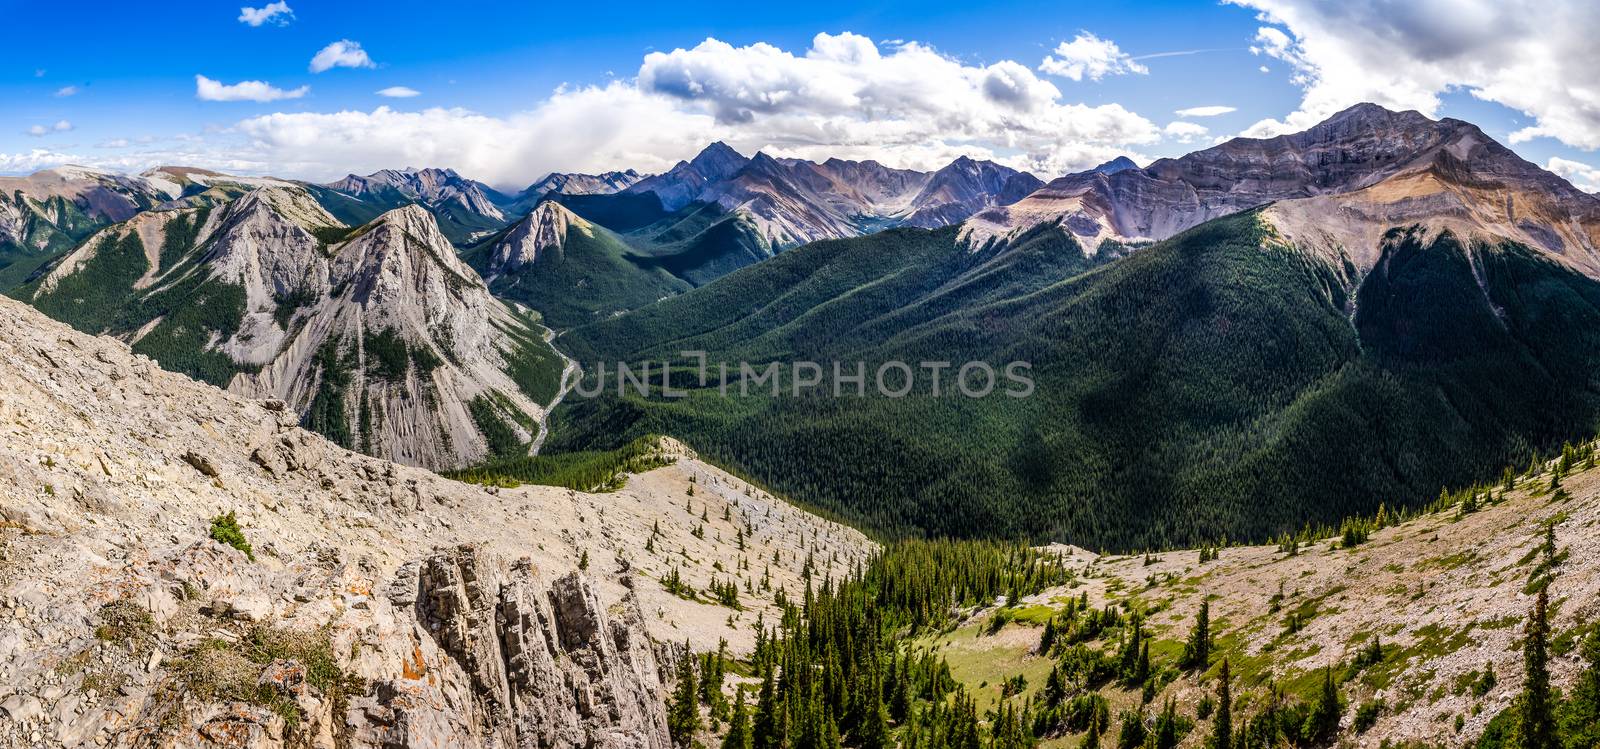 Panoramic view of Rocky mountains range, Alberta, Canada by martinm303